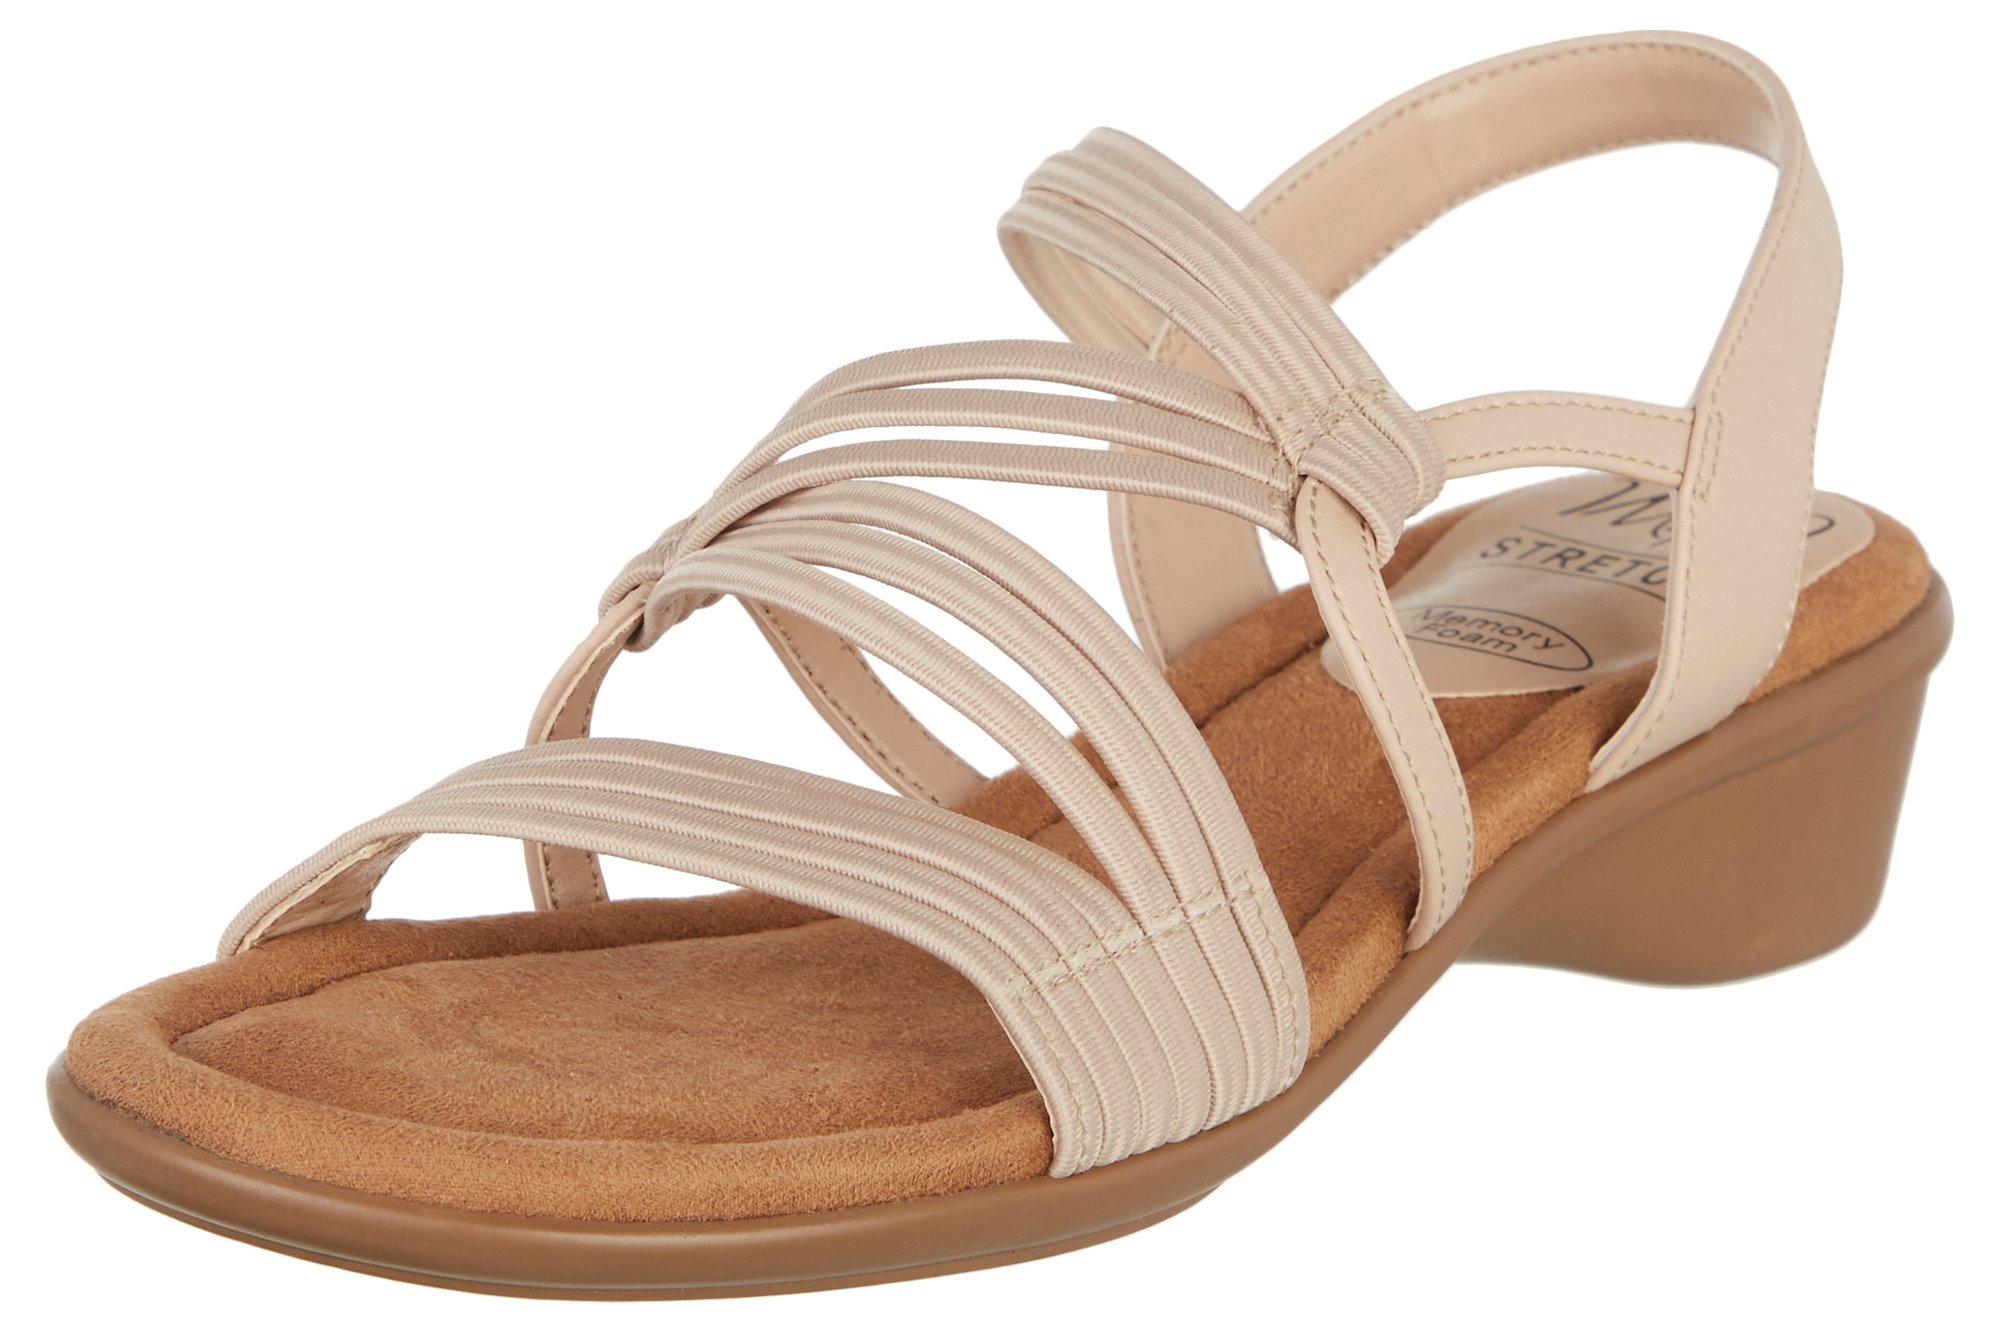 Impo Womens Rollie Sandals